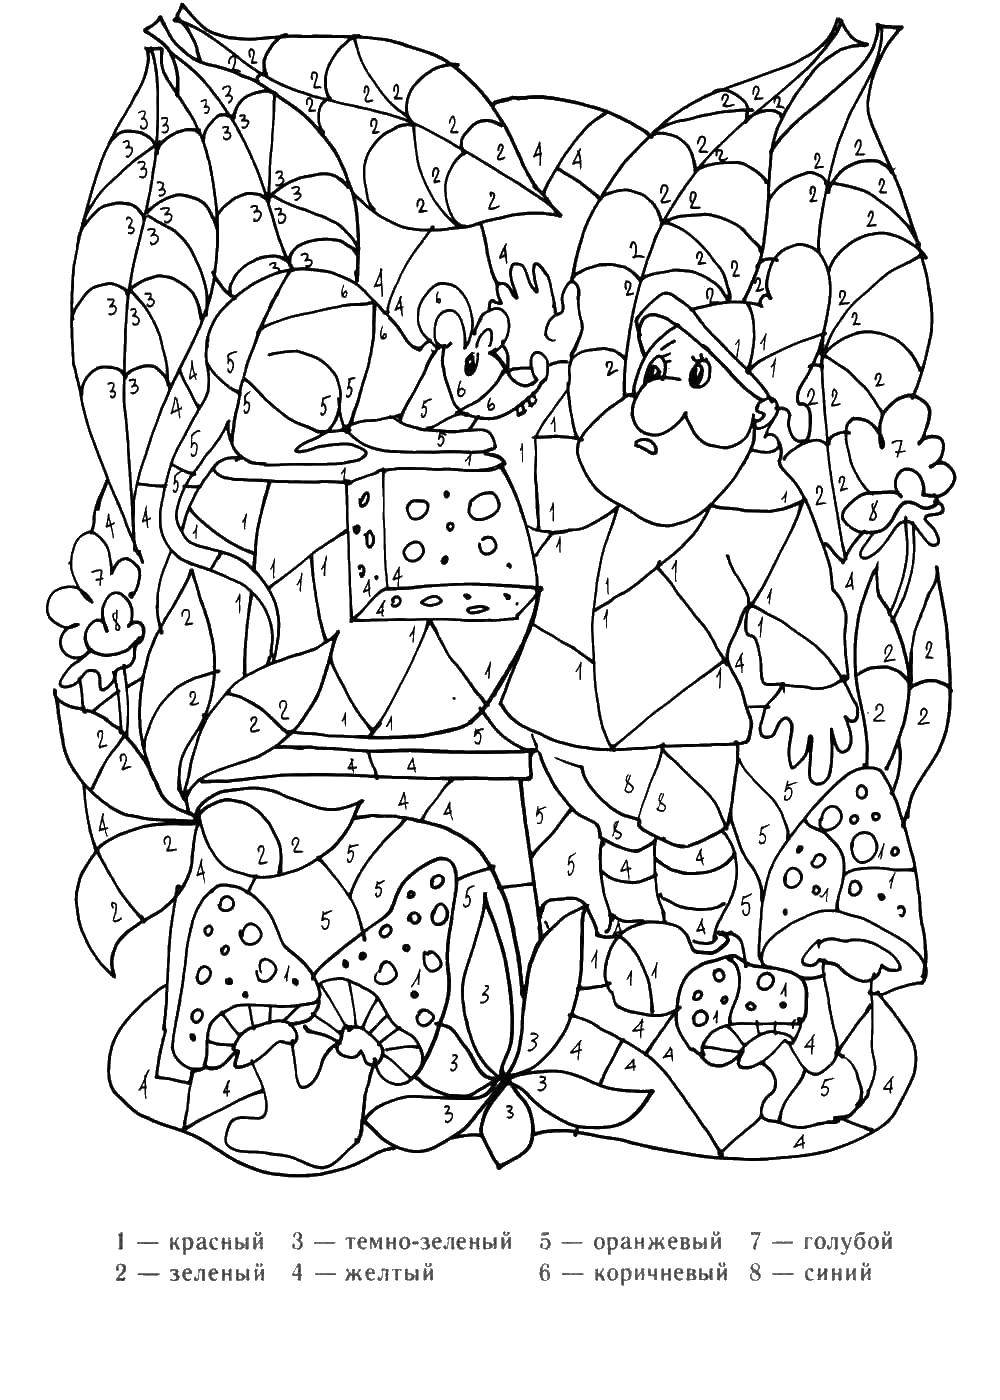 Coloring Dwarf. Category Fairy tales. Tags:  Dwarf.